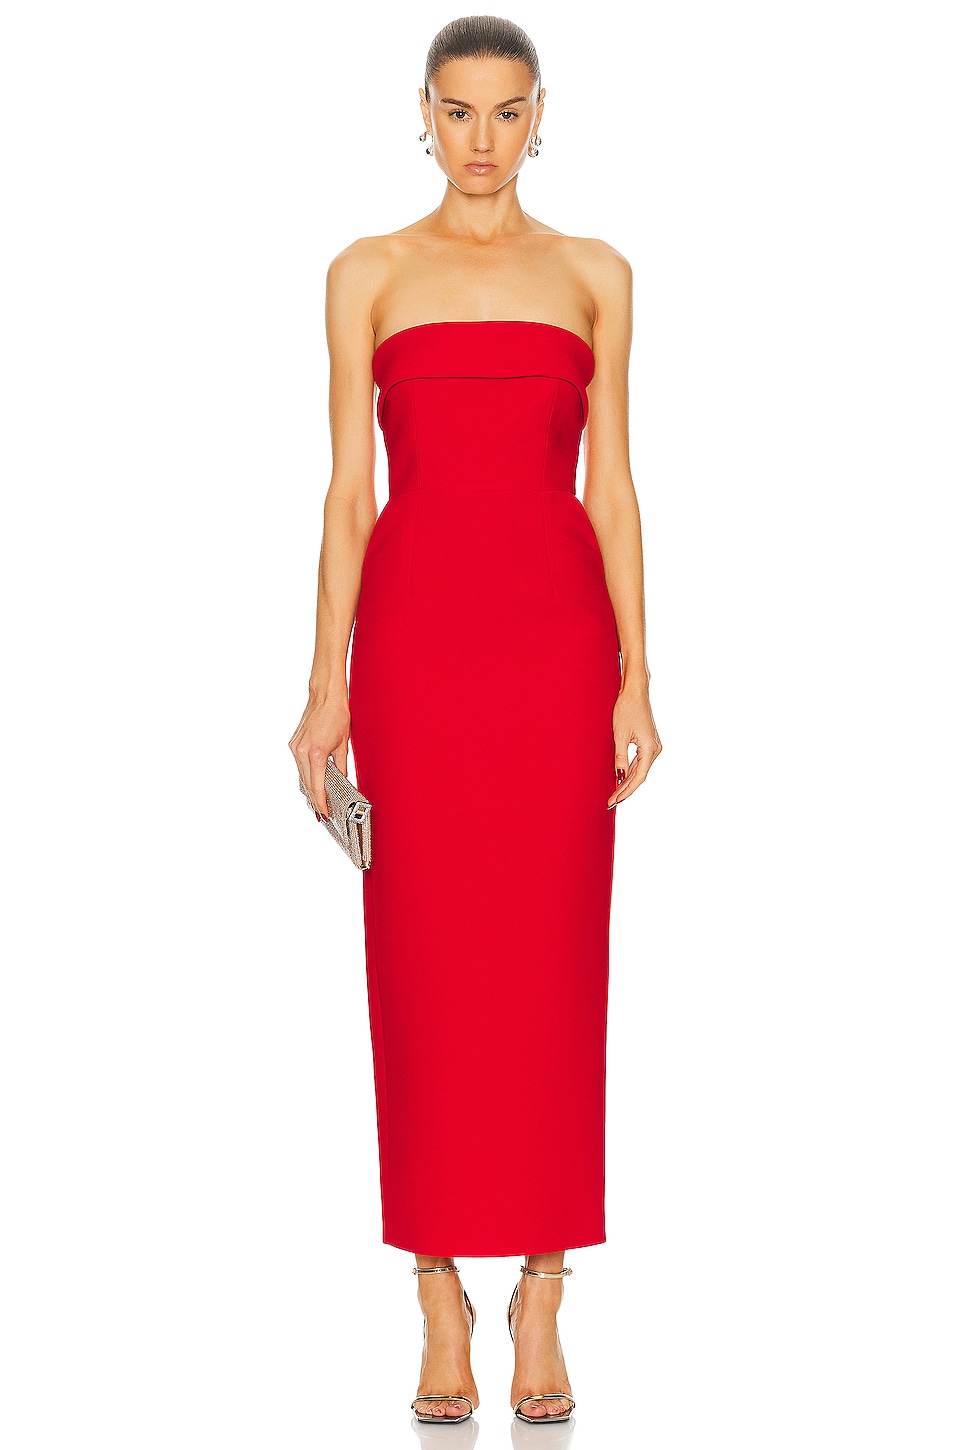 Image 1 of The New Arrivals by Ilkyaz Ozel Rhea Dress in Pedro Red